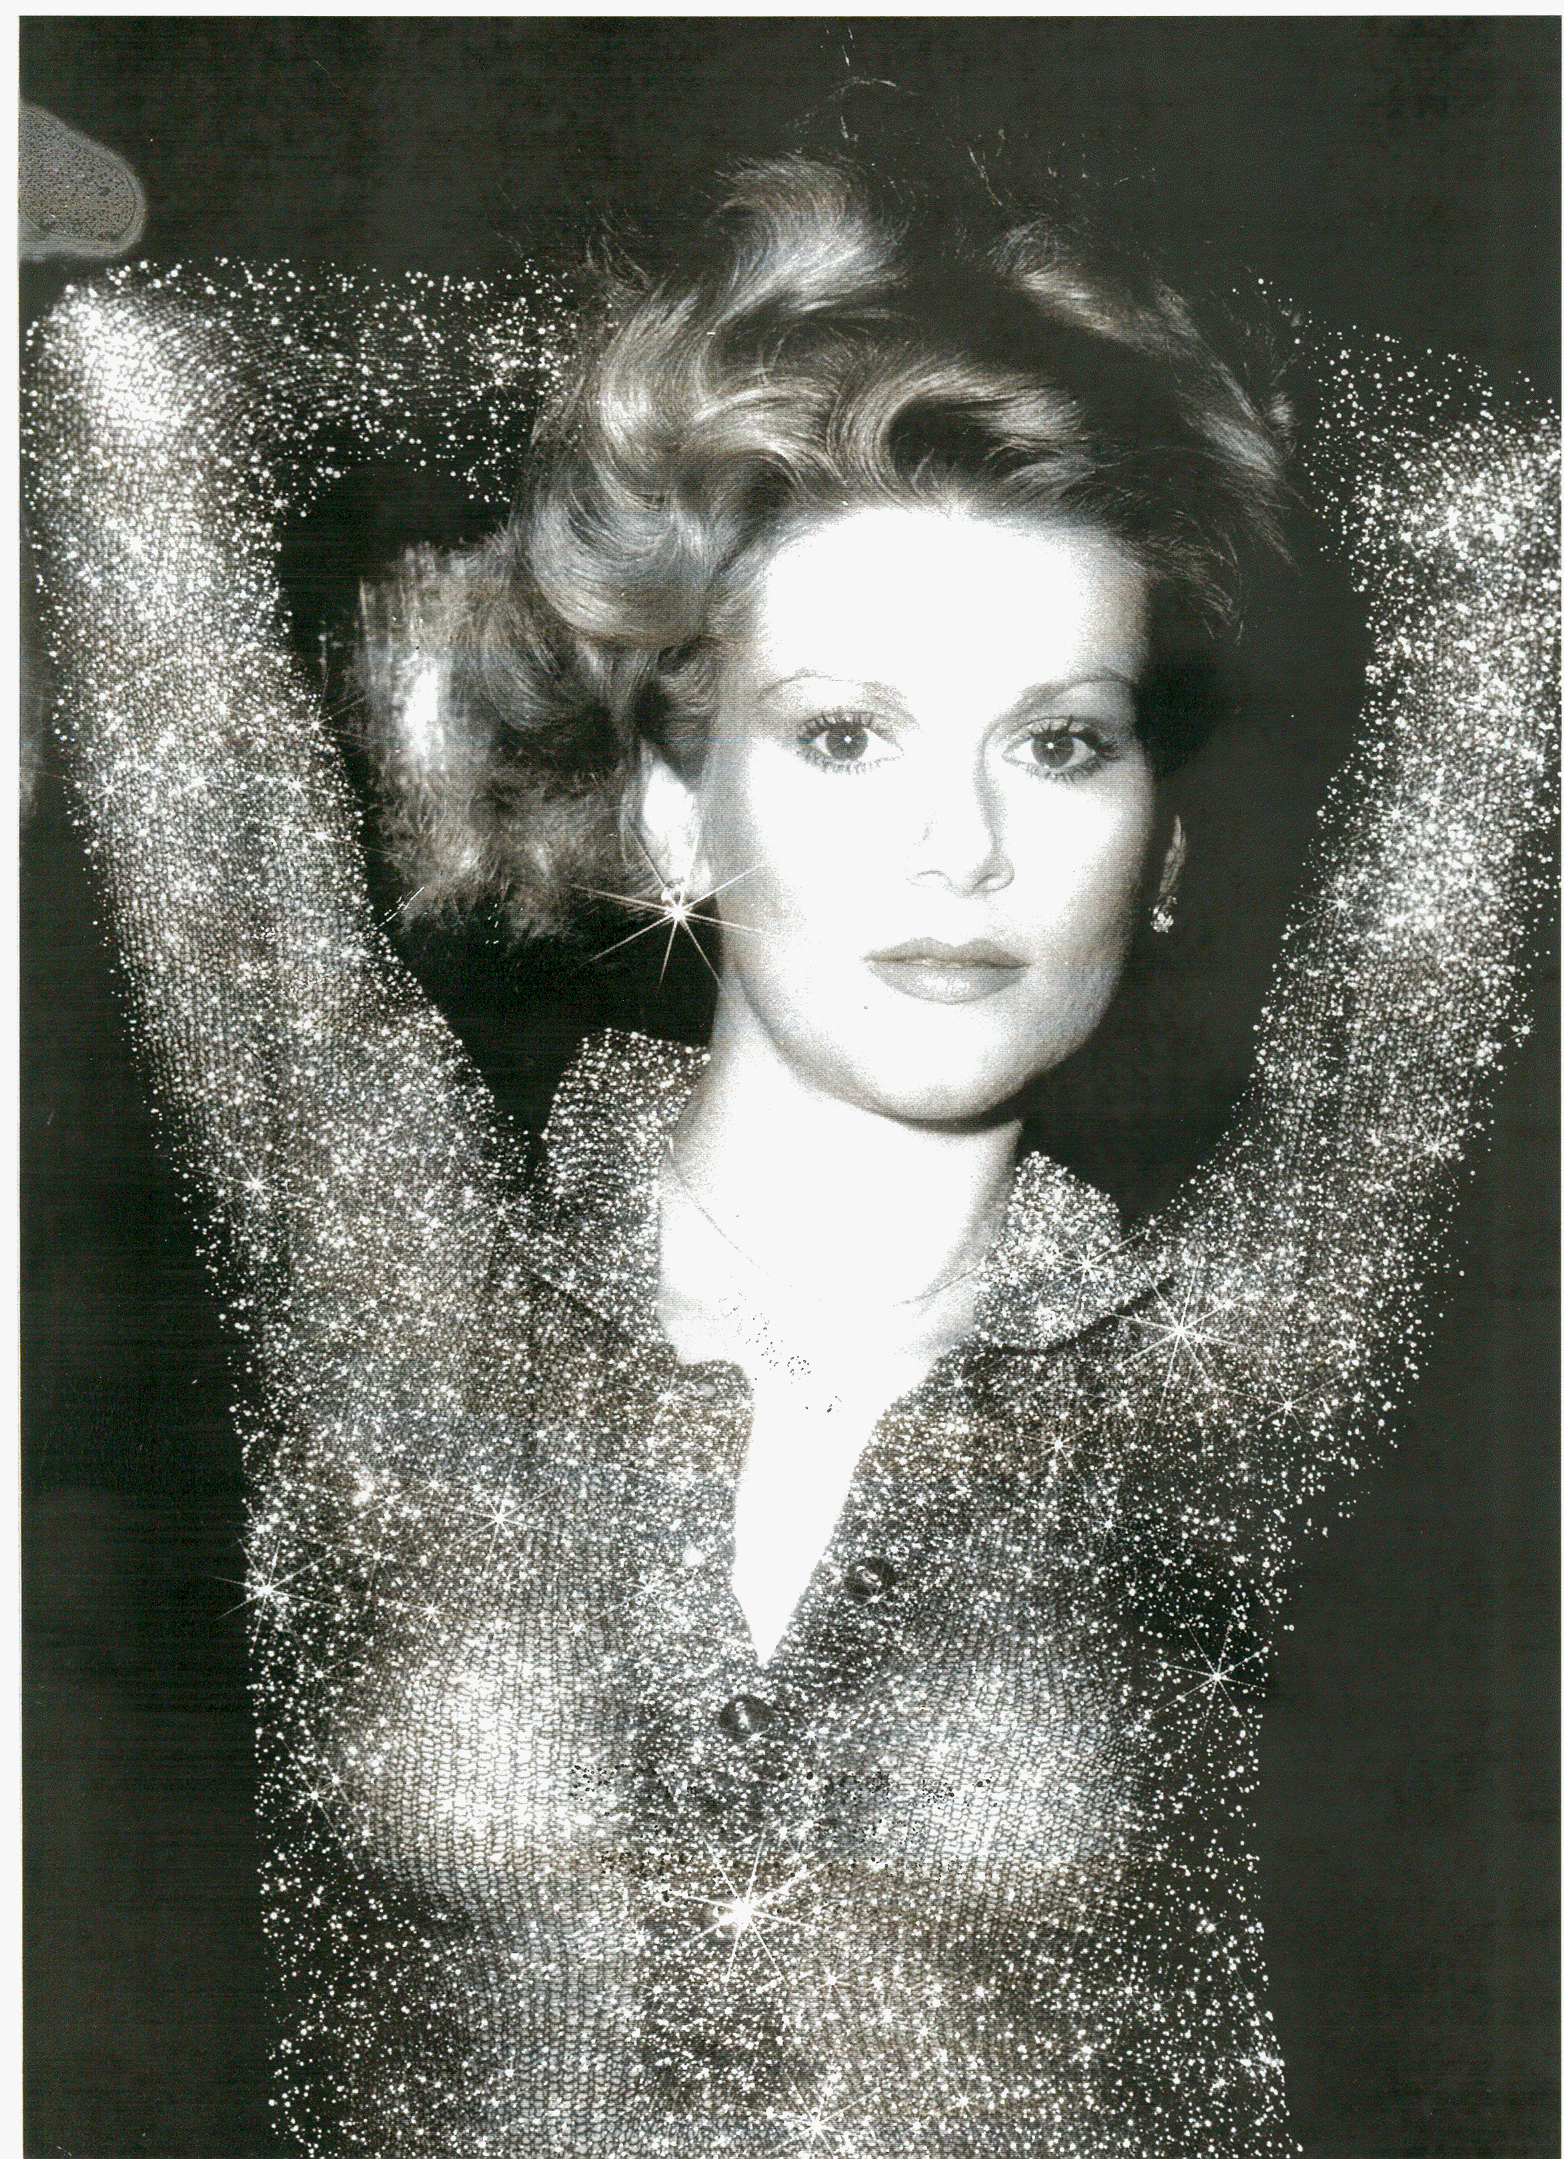 Peggy March images.